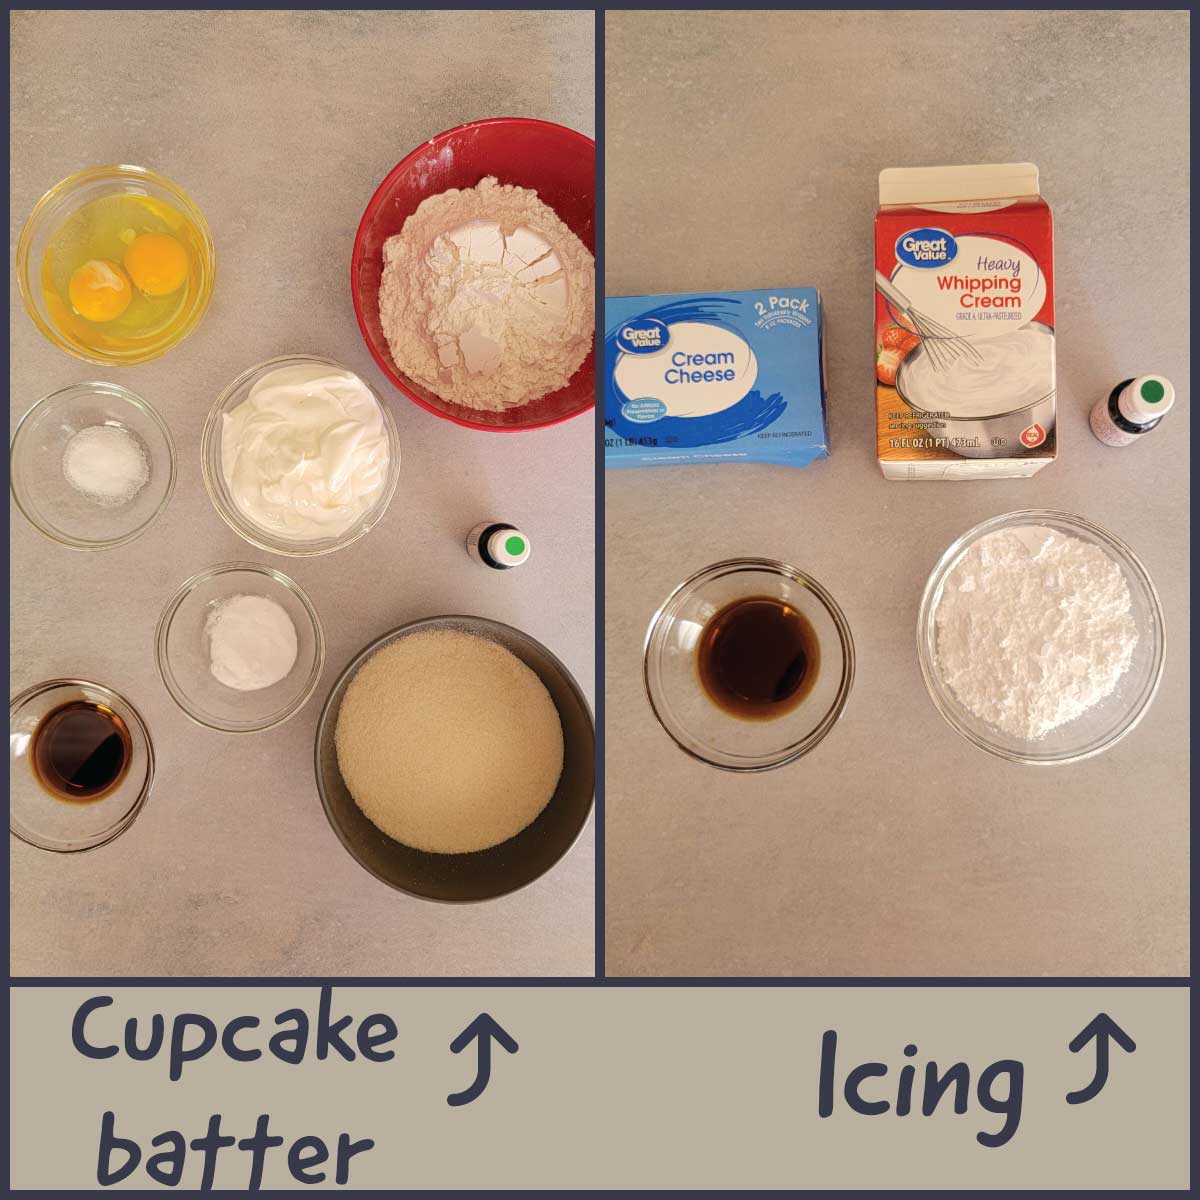 Ingredients for the cupcake batter and icing for the cupcakes.